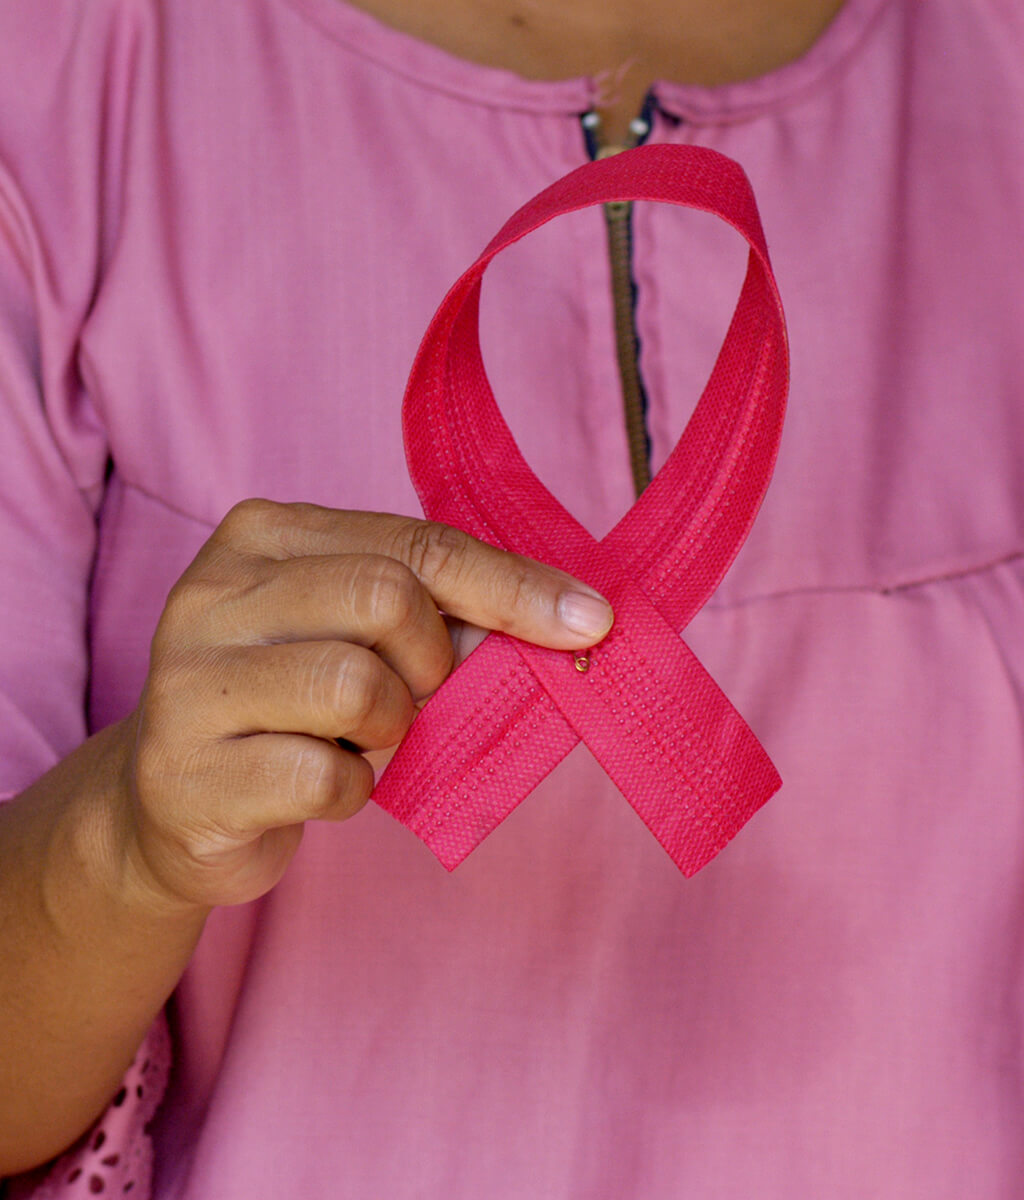 Woman holding up a pink breast cancer ribbon